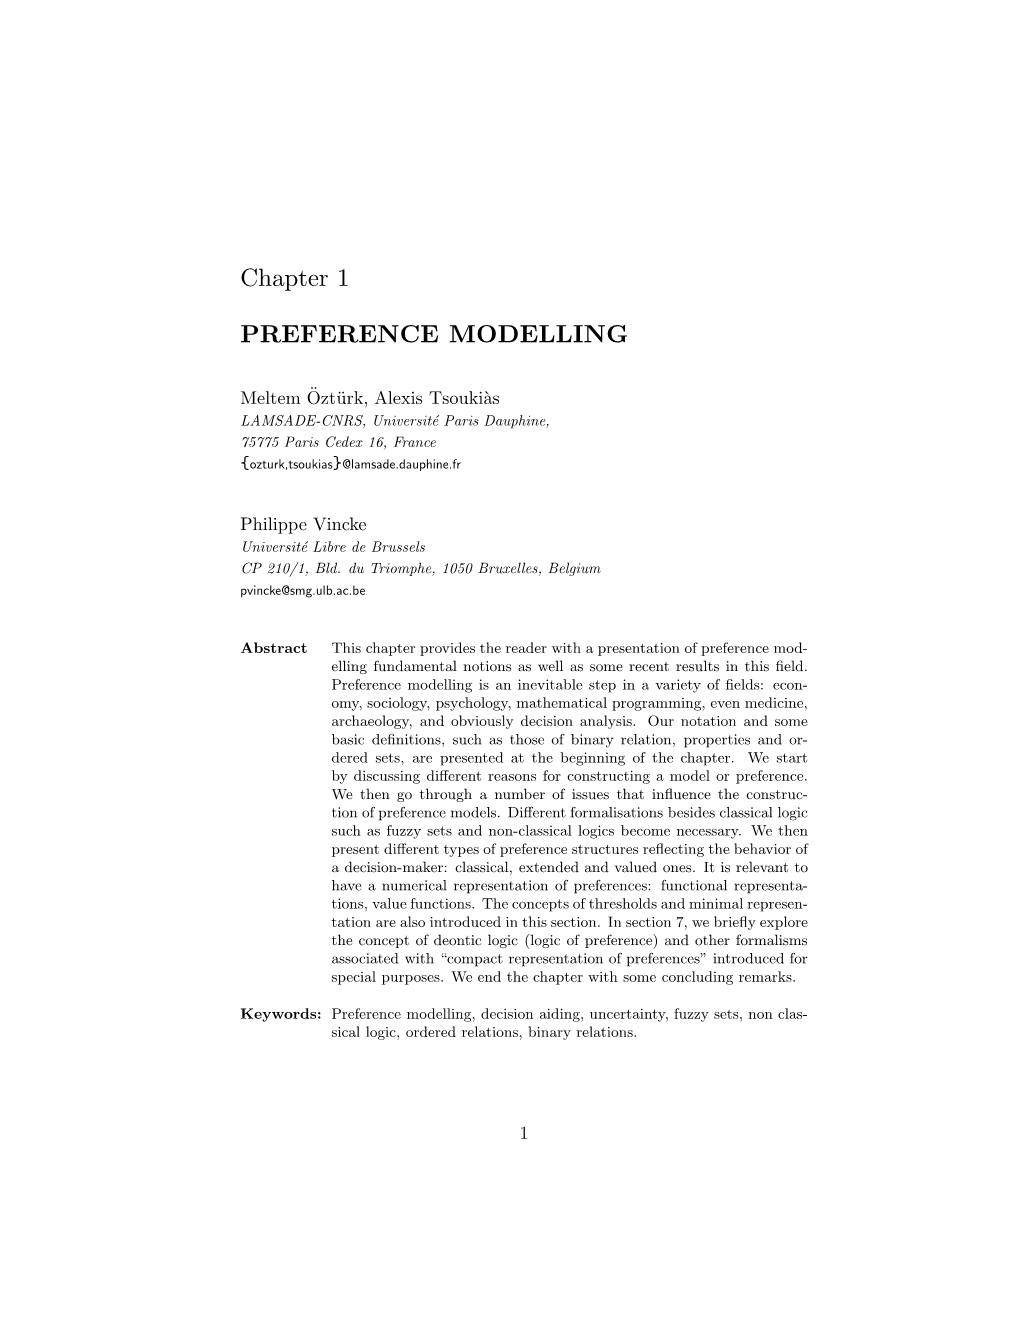 Chapter 1 PREFERENCE MODELLING